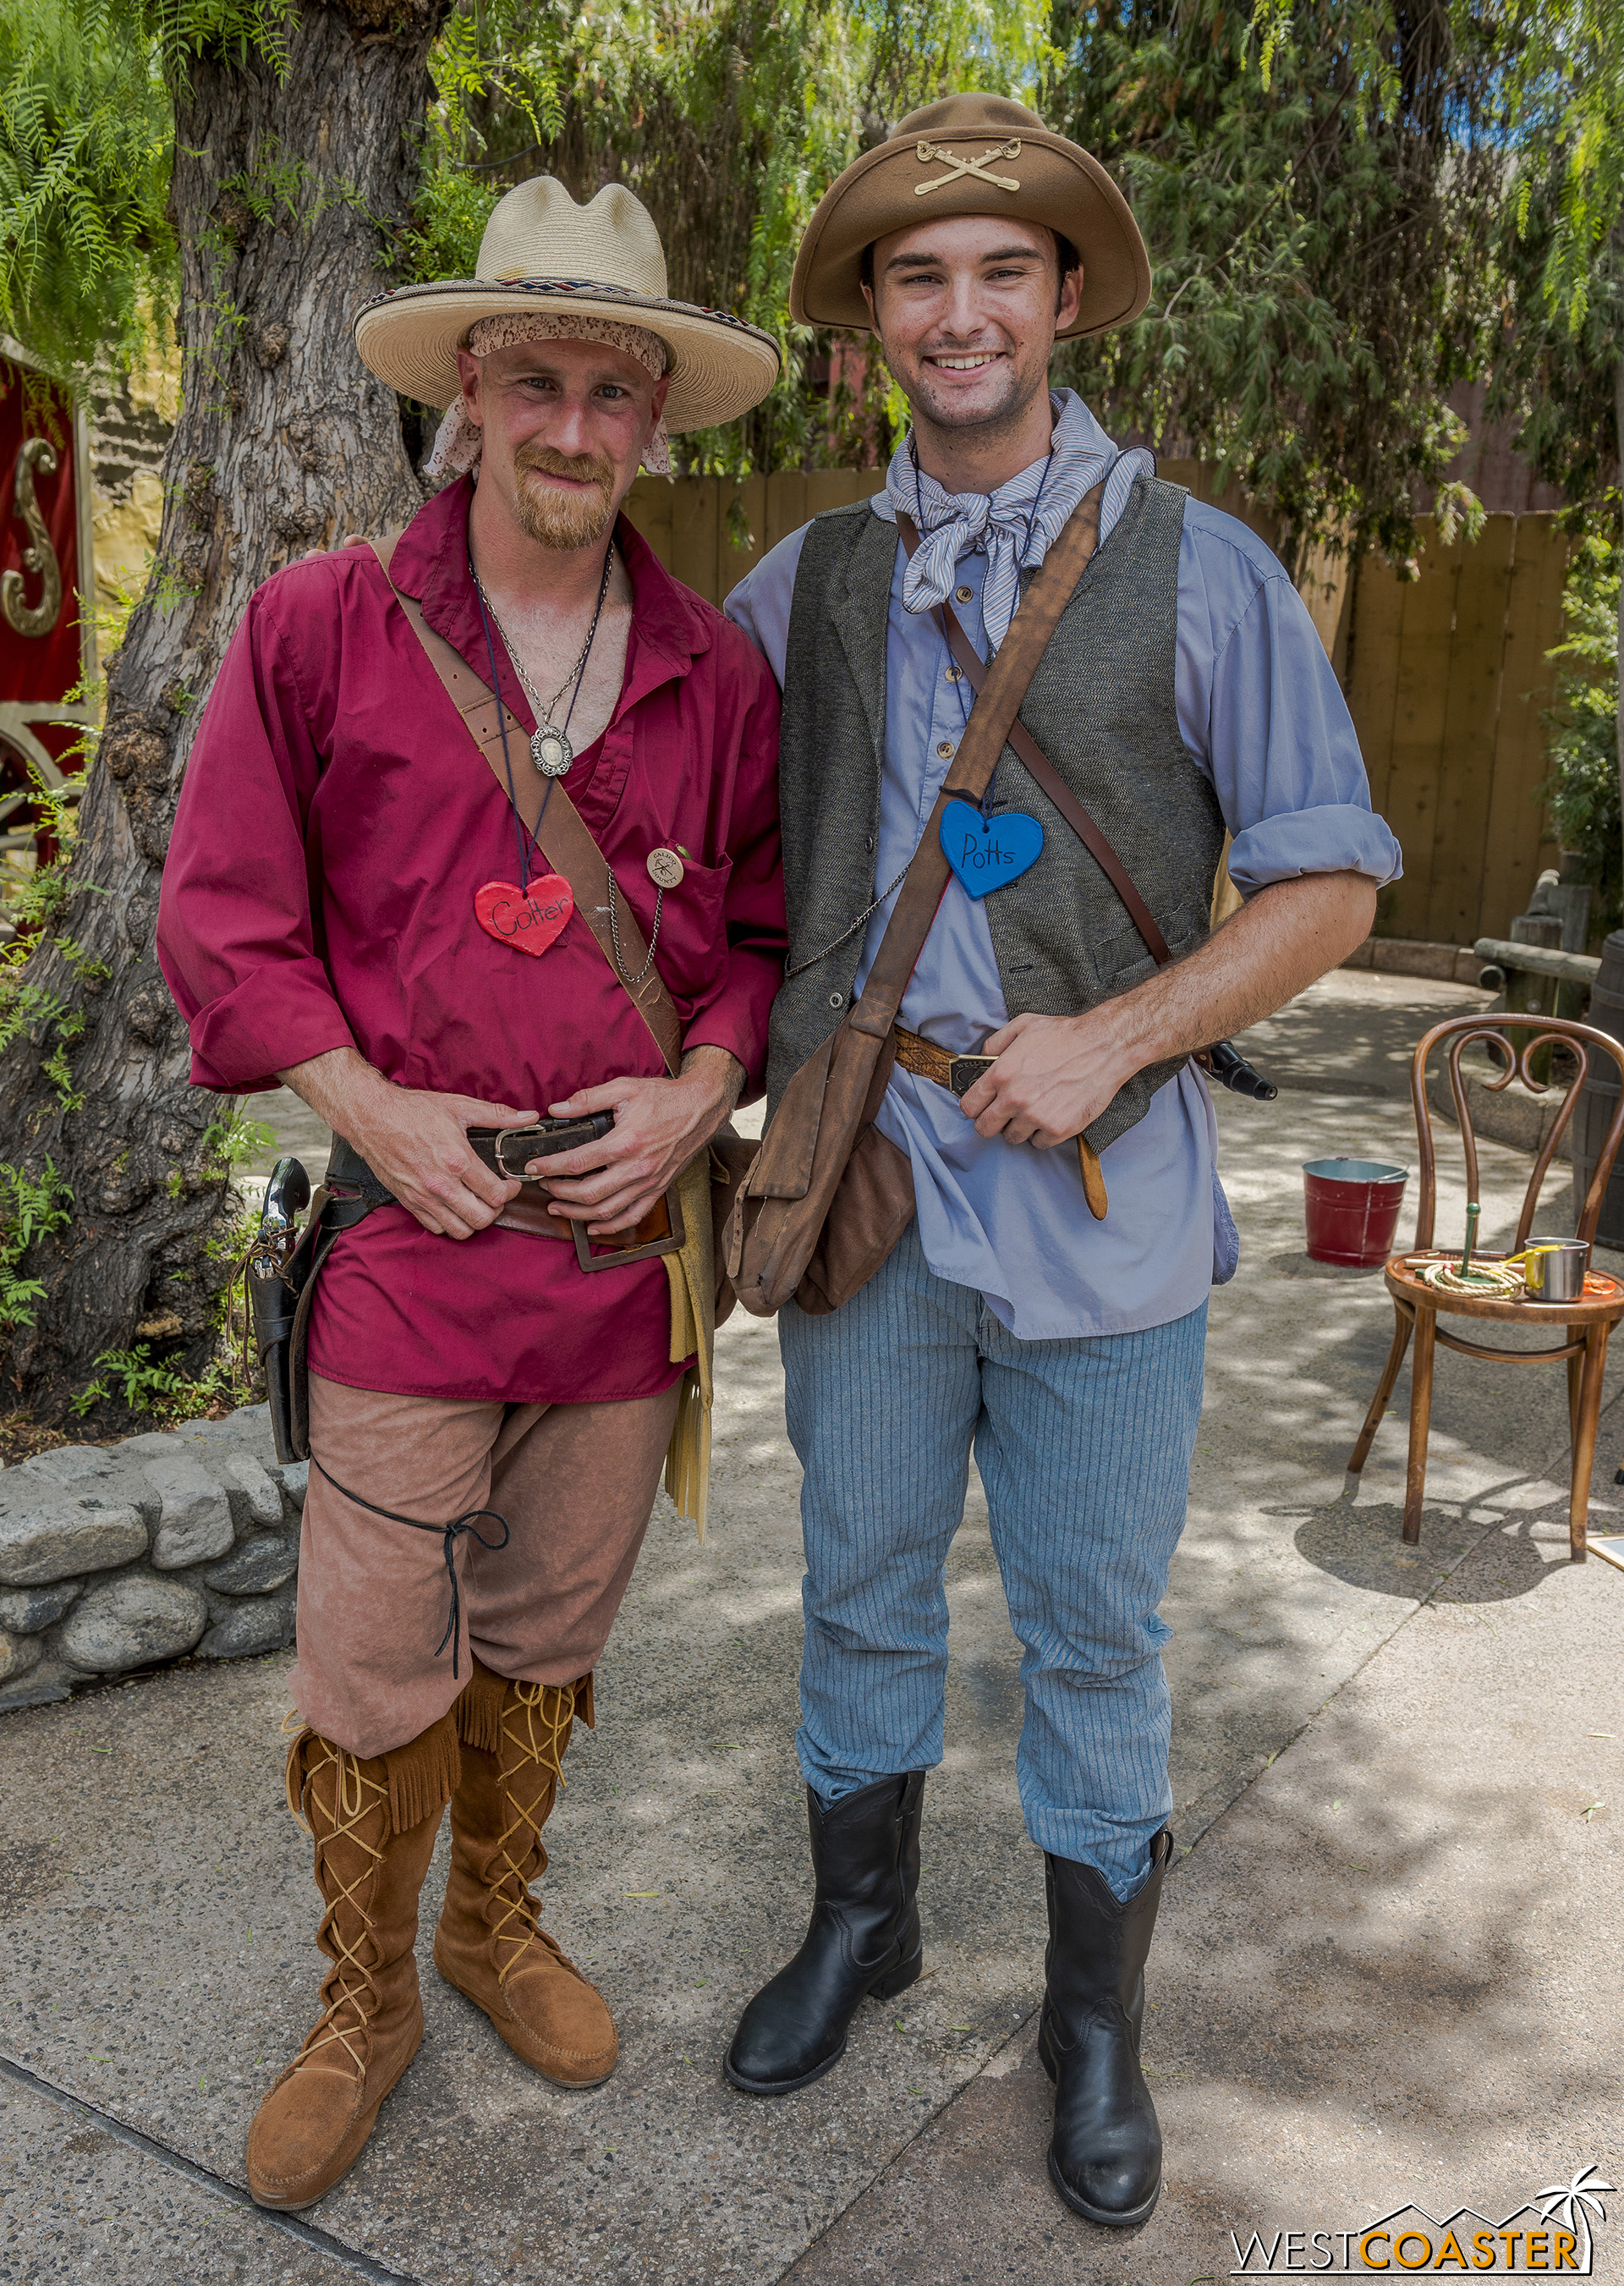  John Colter and John Potts are the explorers and adventurers who have been seeking fantastical beasts all summer.   